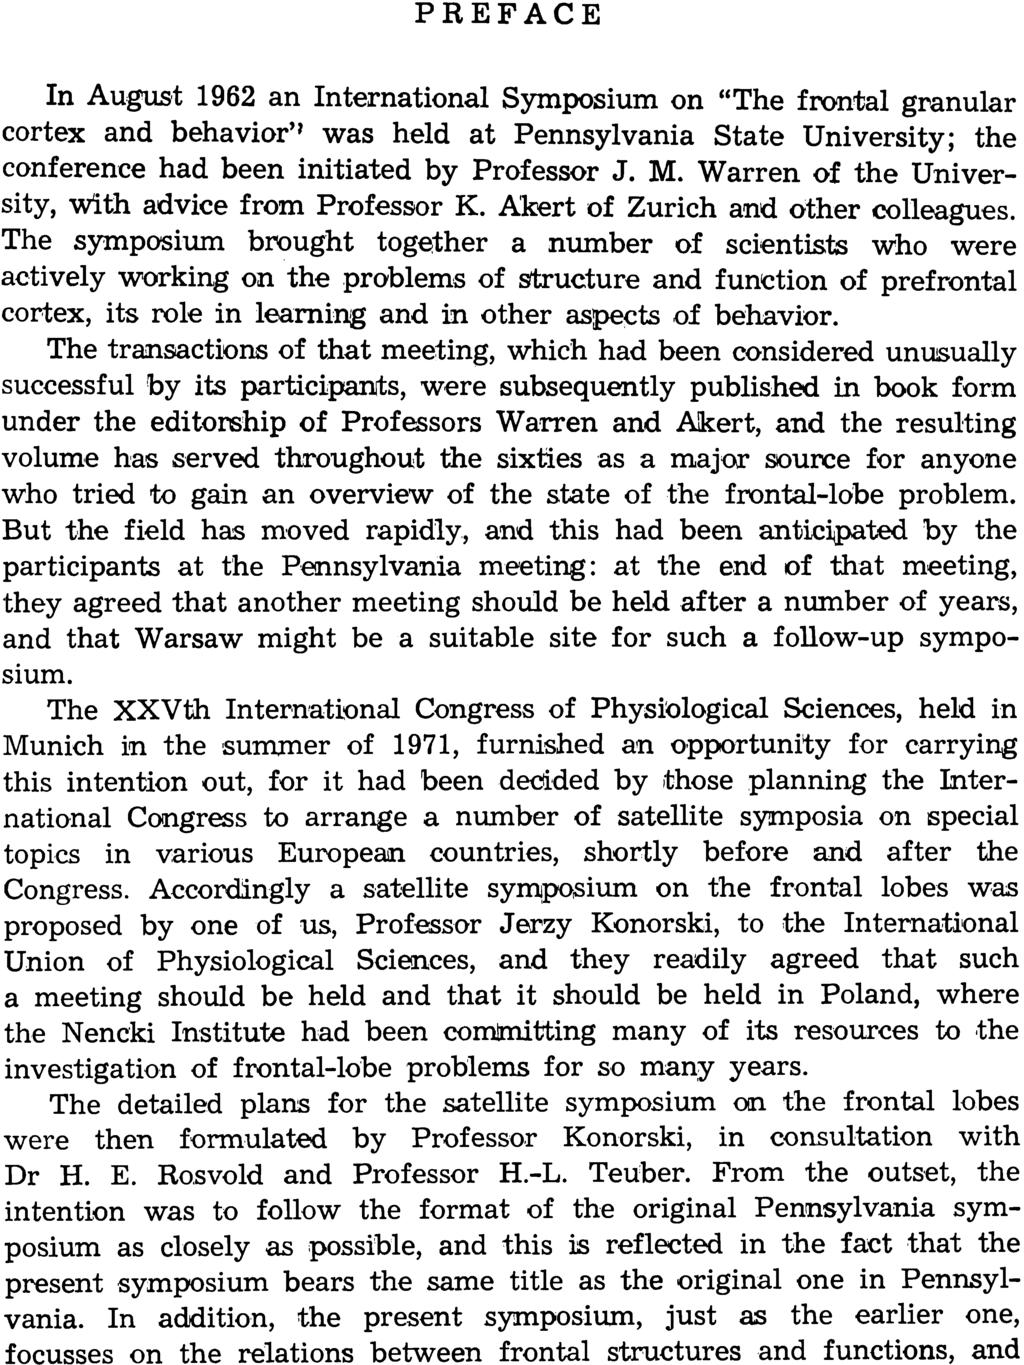 PREFACE In August 1962 an International Symposium on "The fmn$al granular cortex and behavior" was held at Pennsylvania State University; the conference had been initiated by Professor J. M.